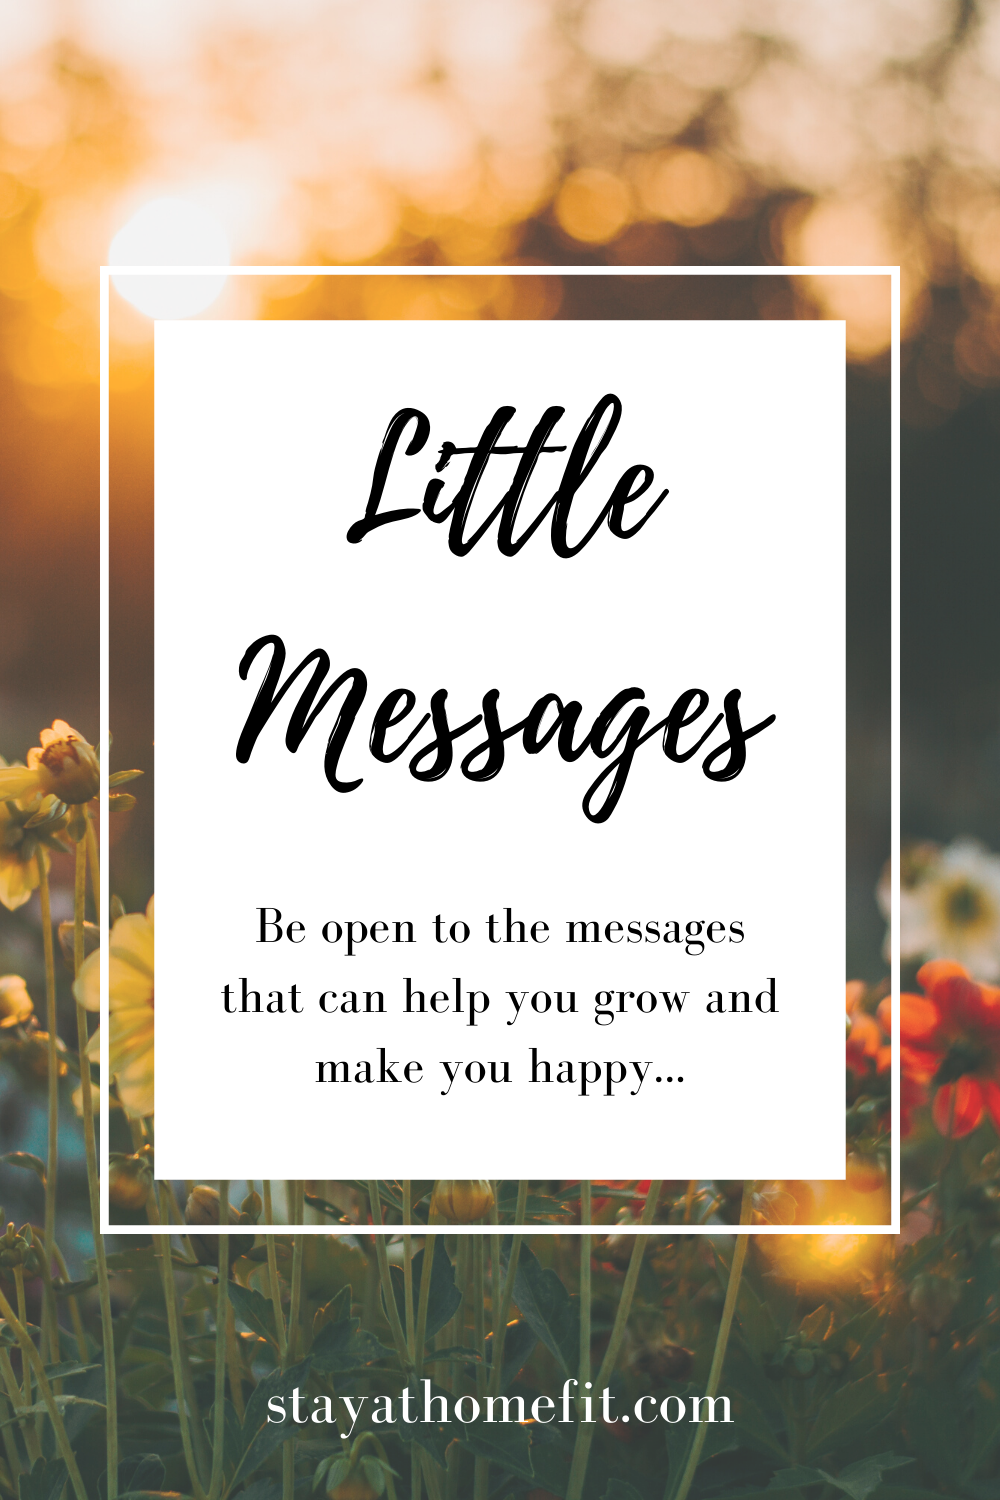 Little Messages: Be open to the messages that can help you grow and make you happy...